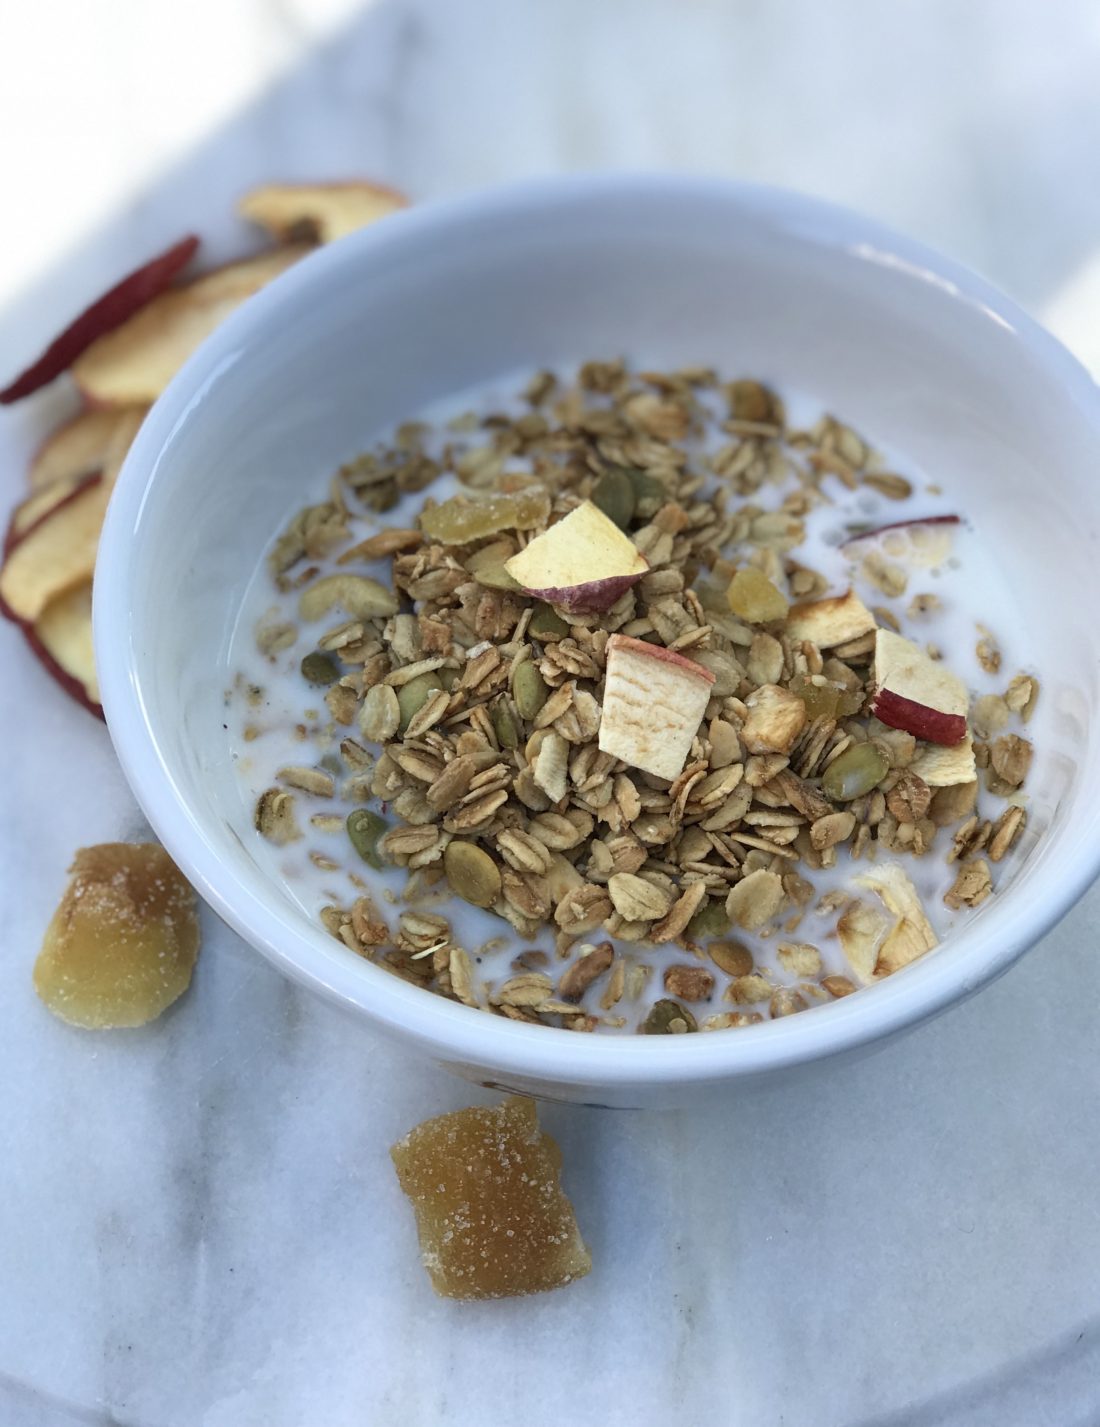 Gingersnap granola by Eat Like a Yogi—Move over pumpkin spice, there's ...